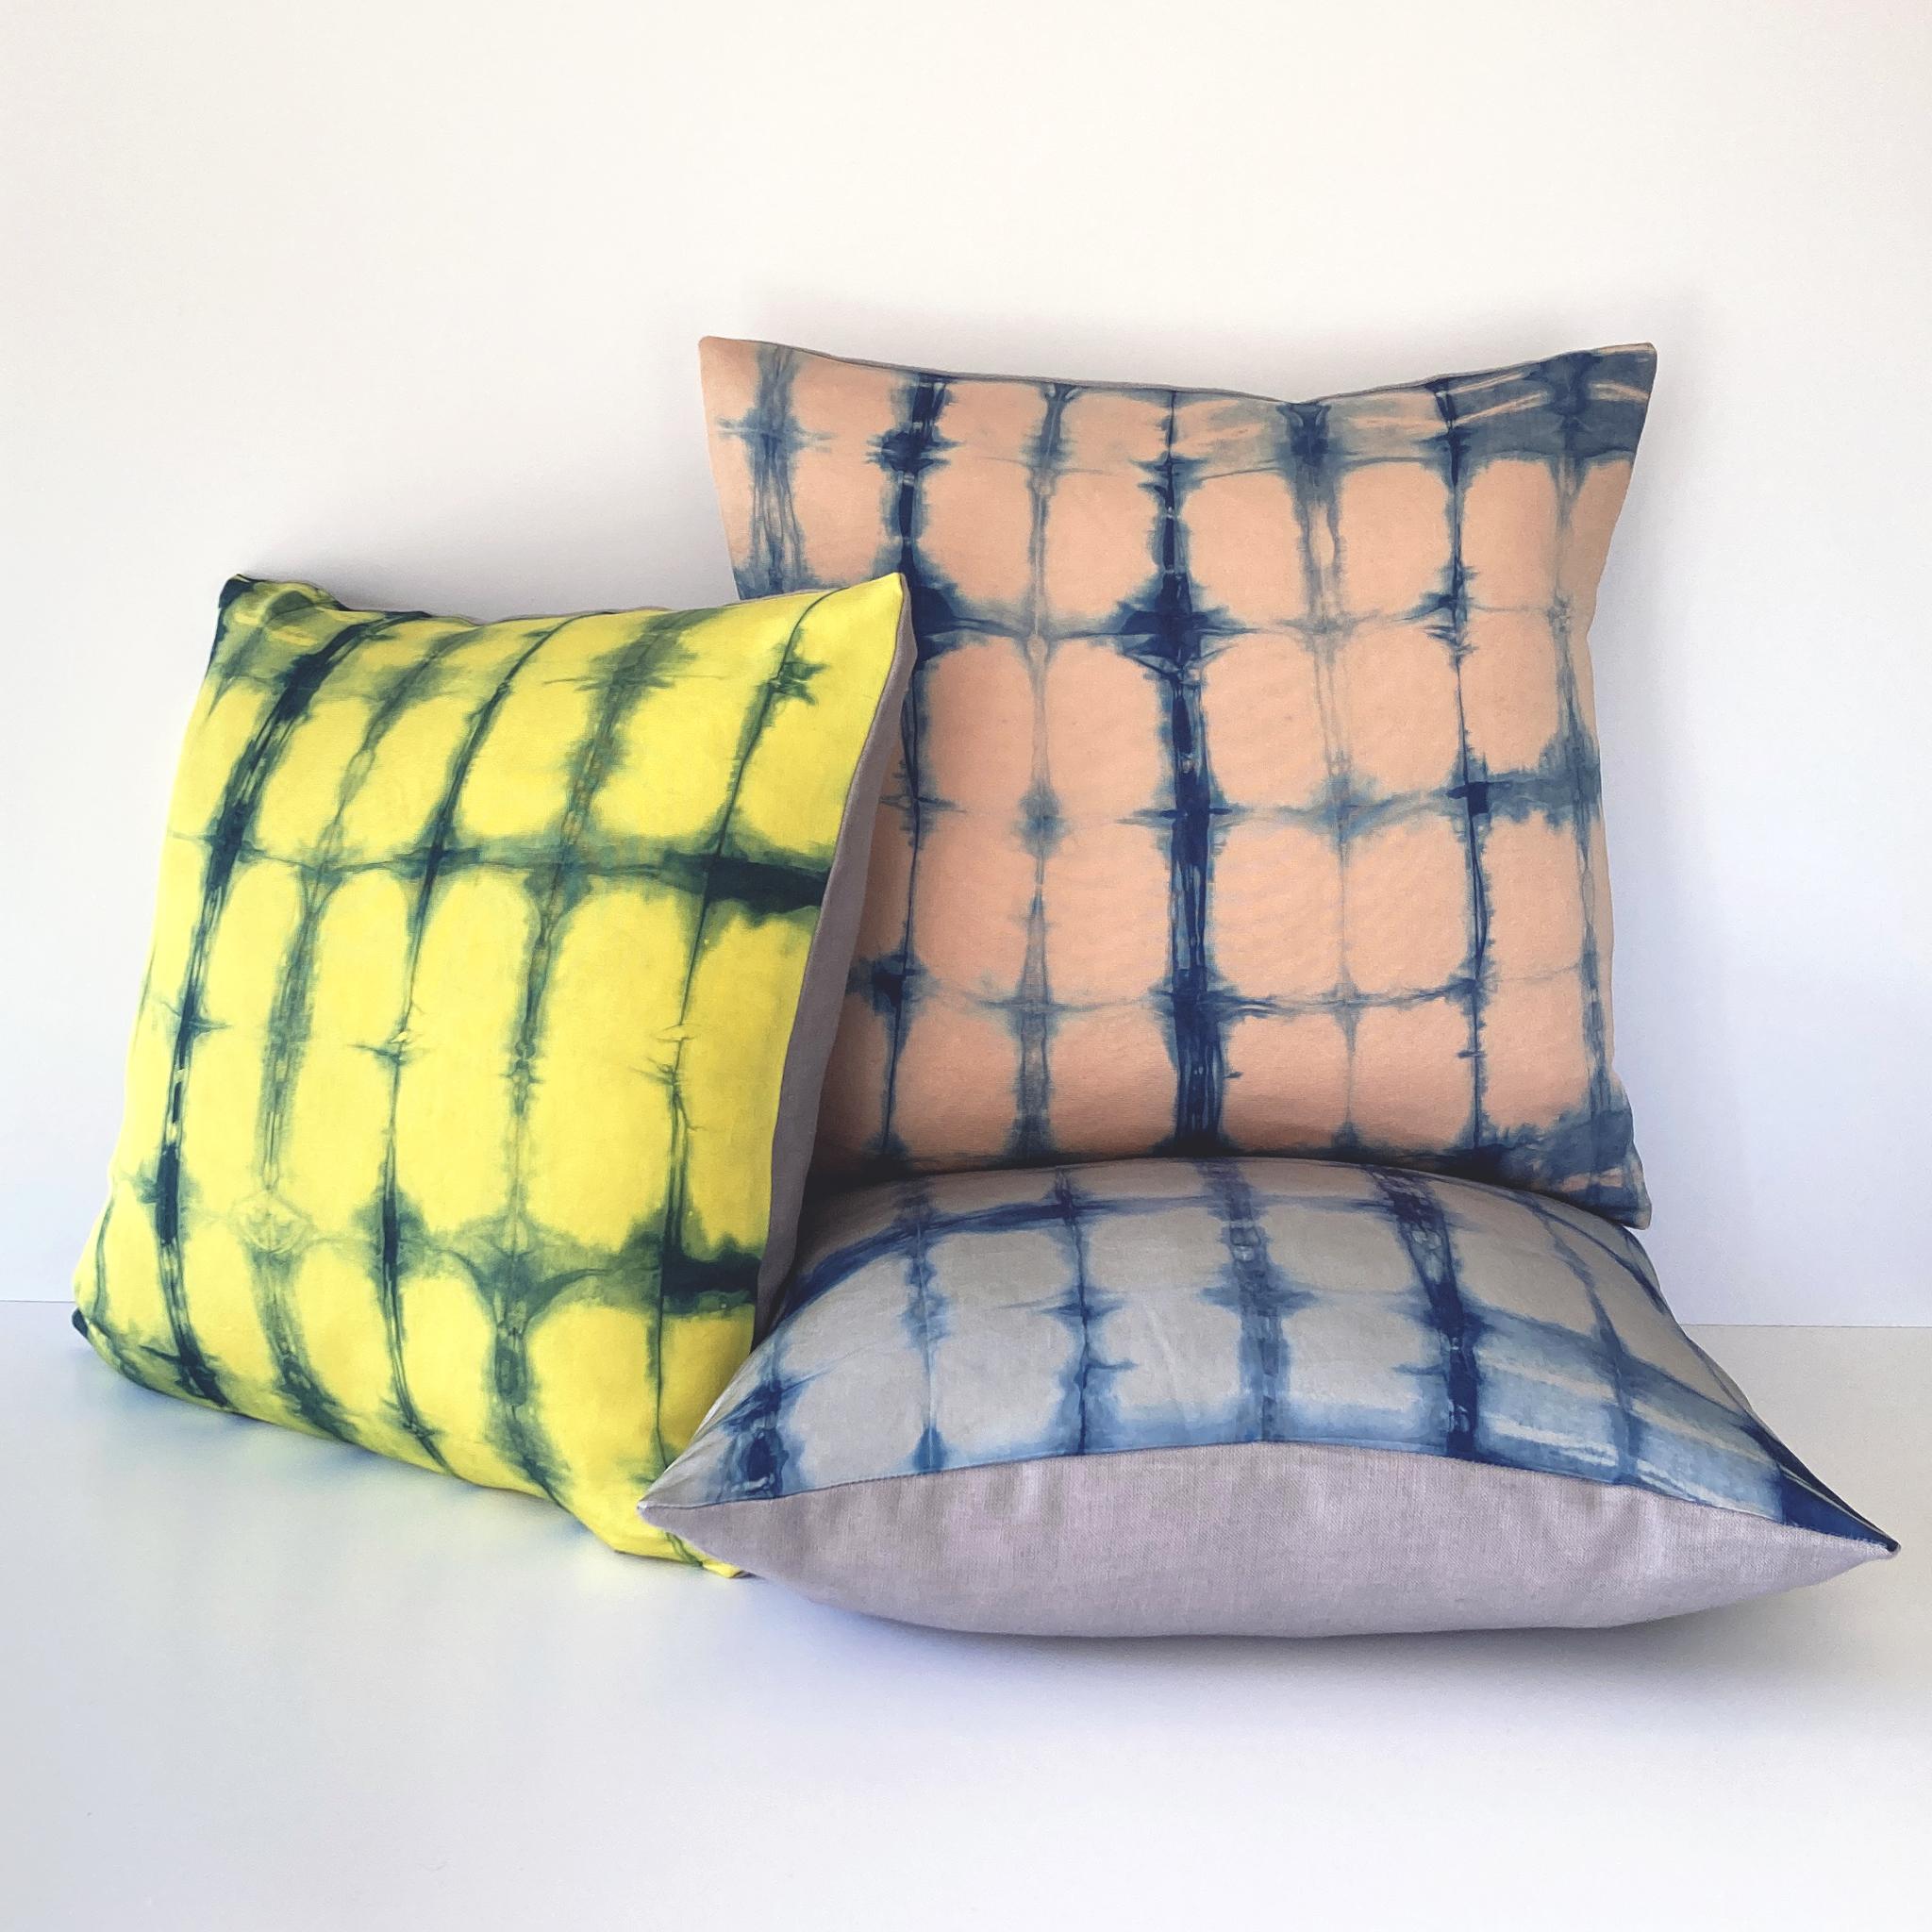 Hand Dyed Silk Pillow, Silver Gray & Indigo Blue Grid For Sale 1